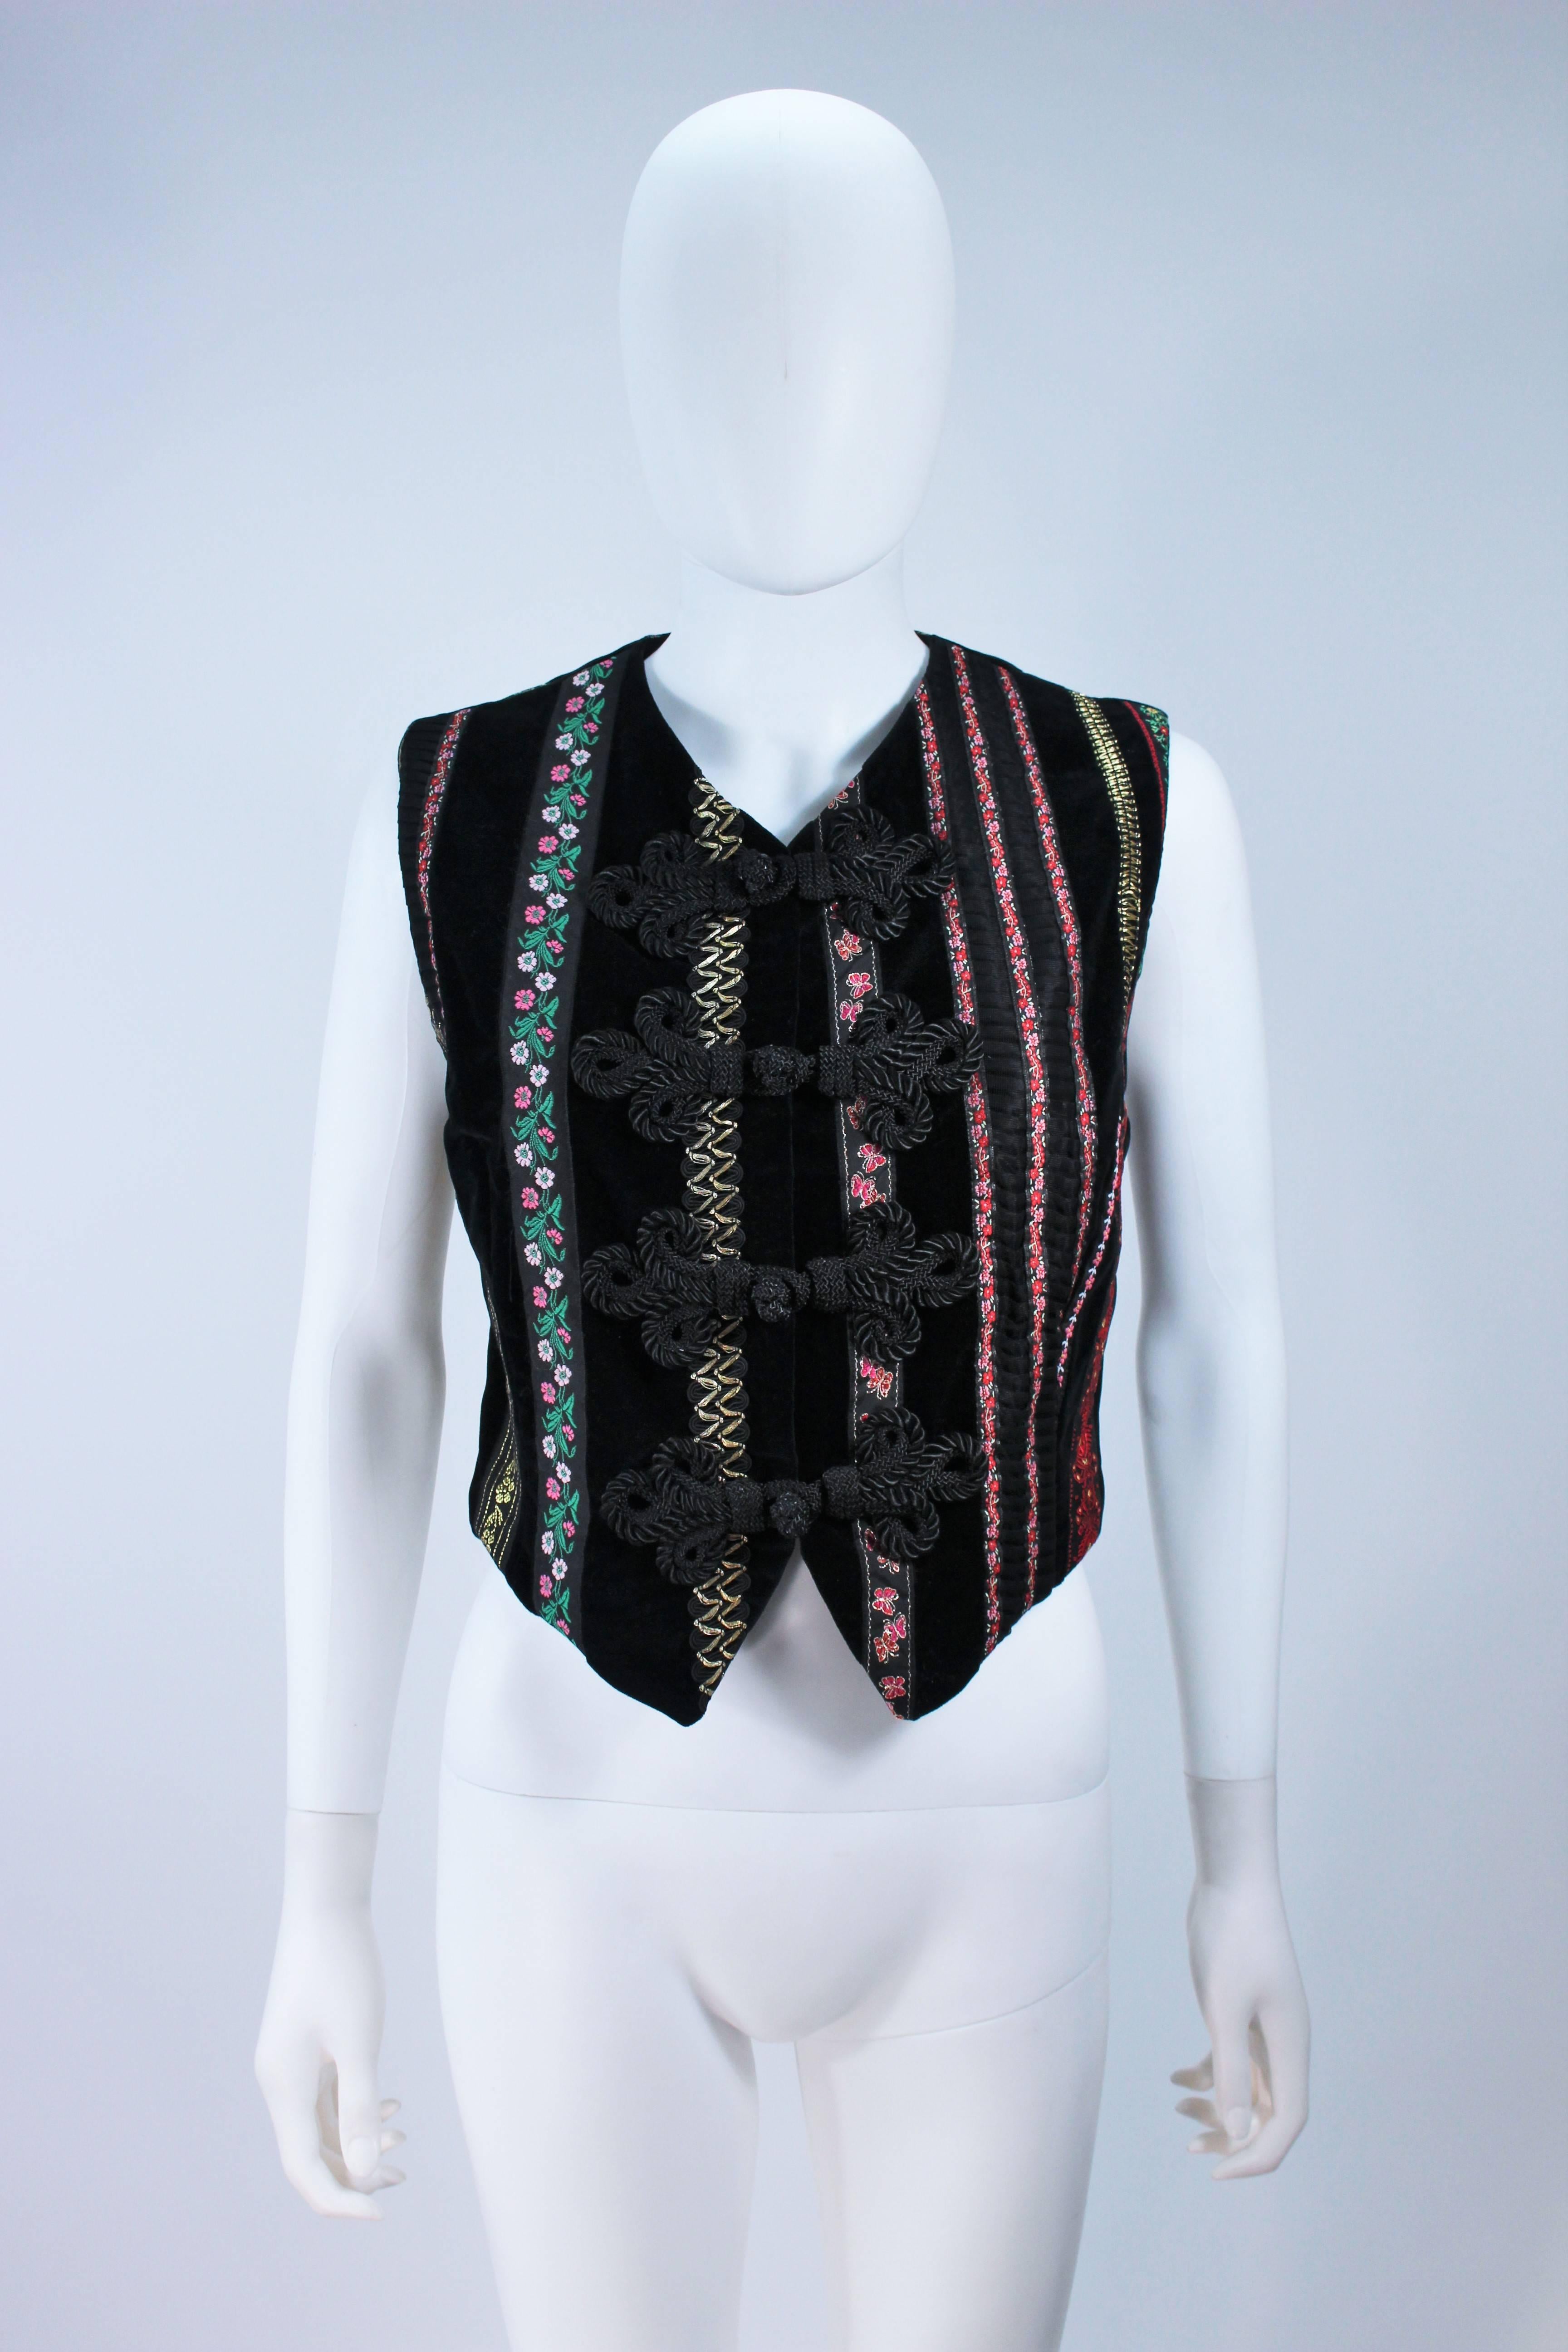  This Dolce and Gabbana  vest is composed of a black velvet with multi-color trim. Features knot style button closures. In great vintage condition. 

  **Please cross-reference measurements for personal accuracy. Size in description box is an